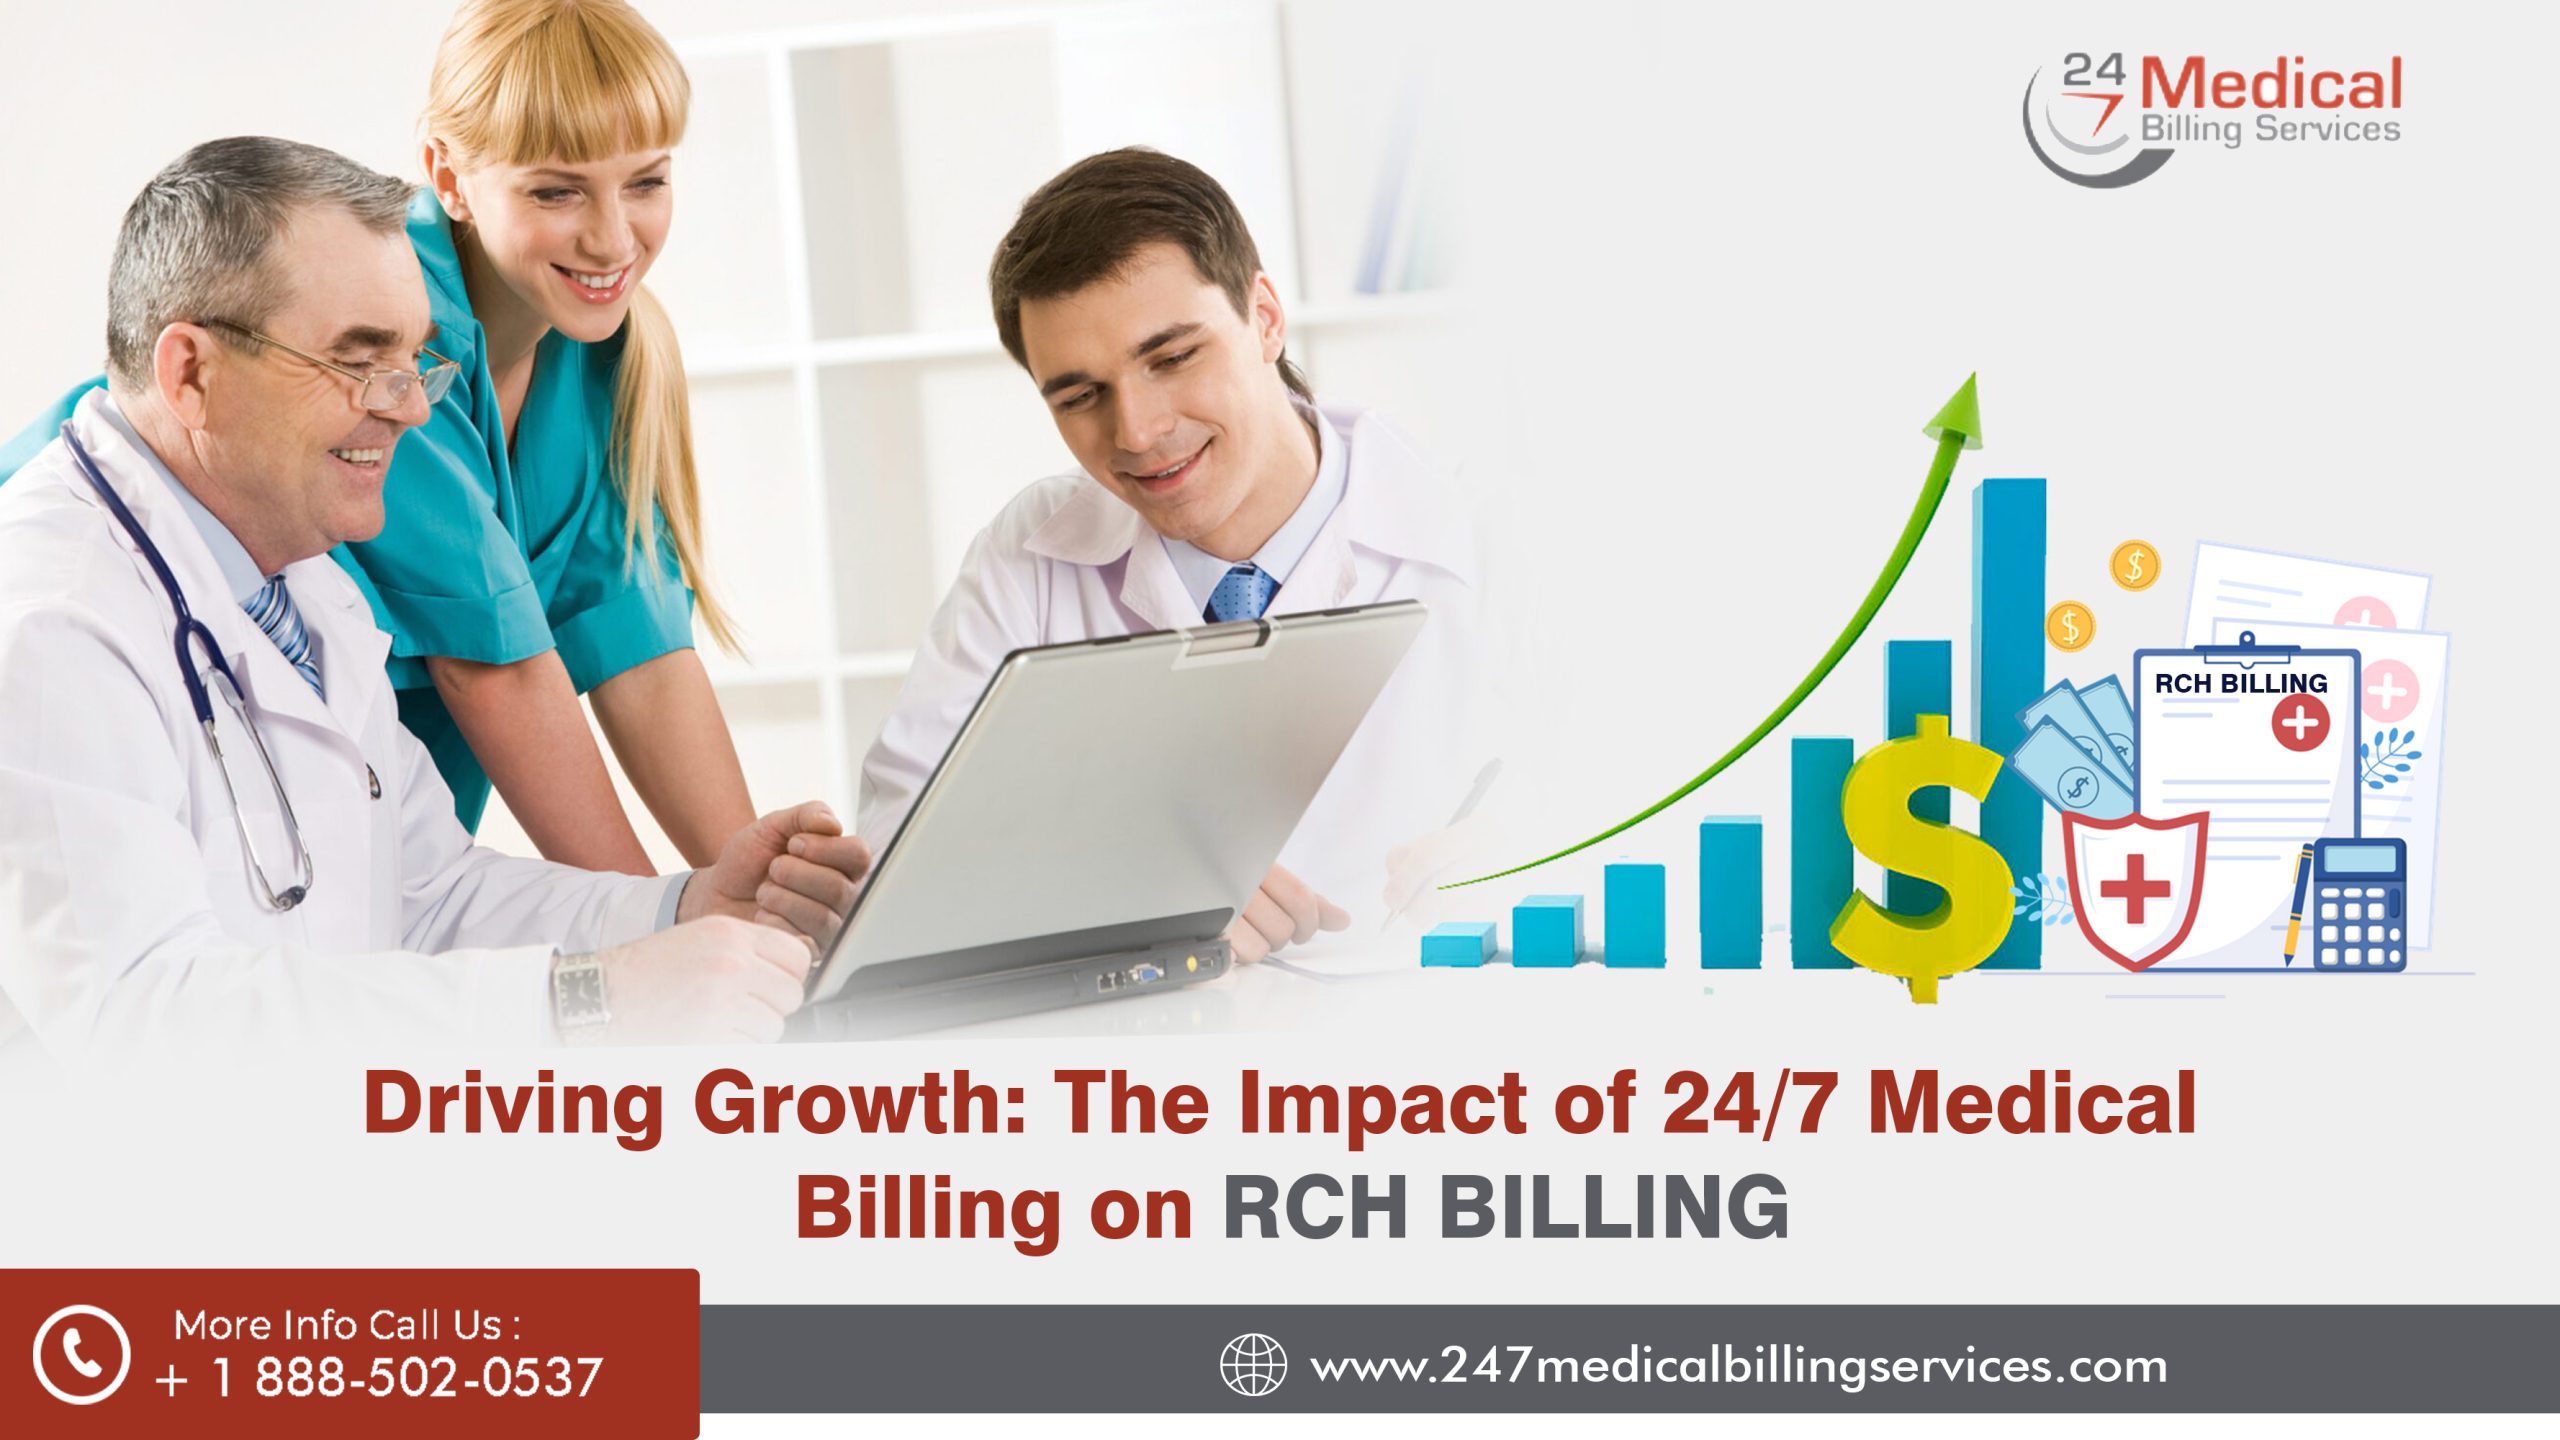  Driving Growth: The Impact of 24/7 Medical Billing Services on RCH Billing